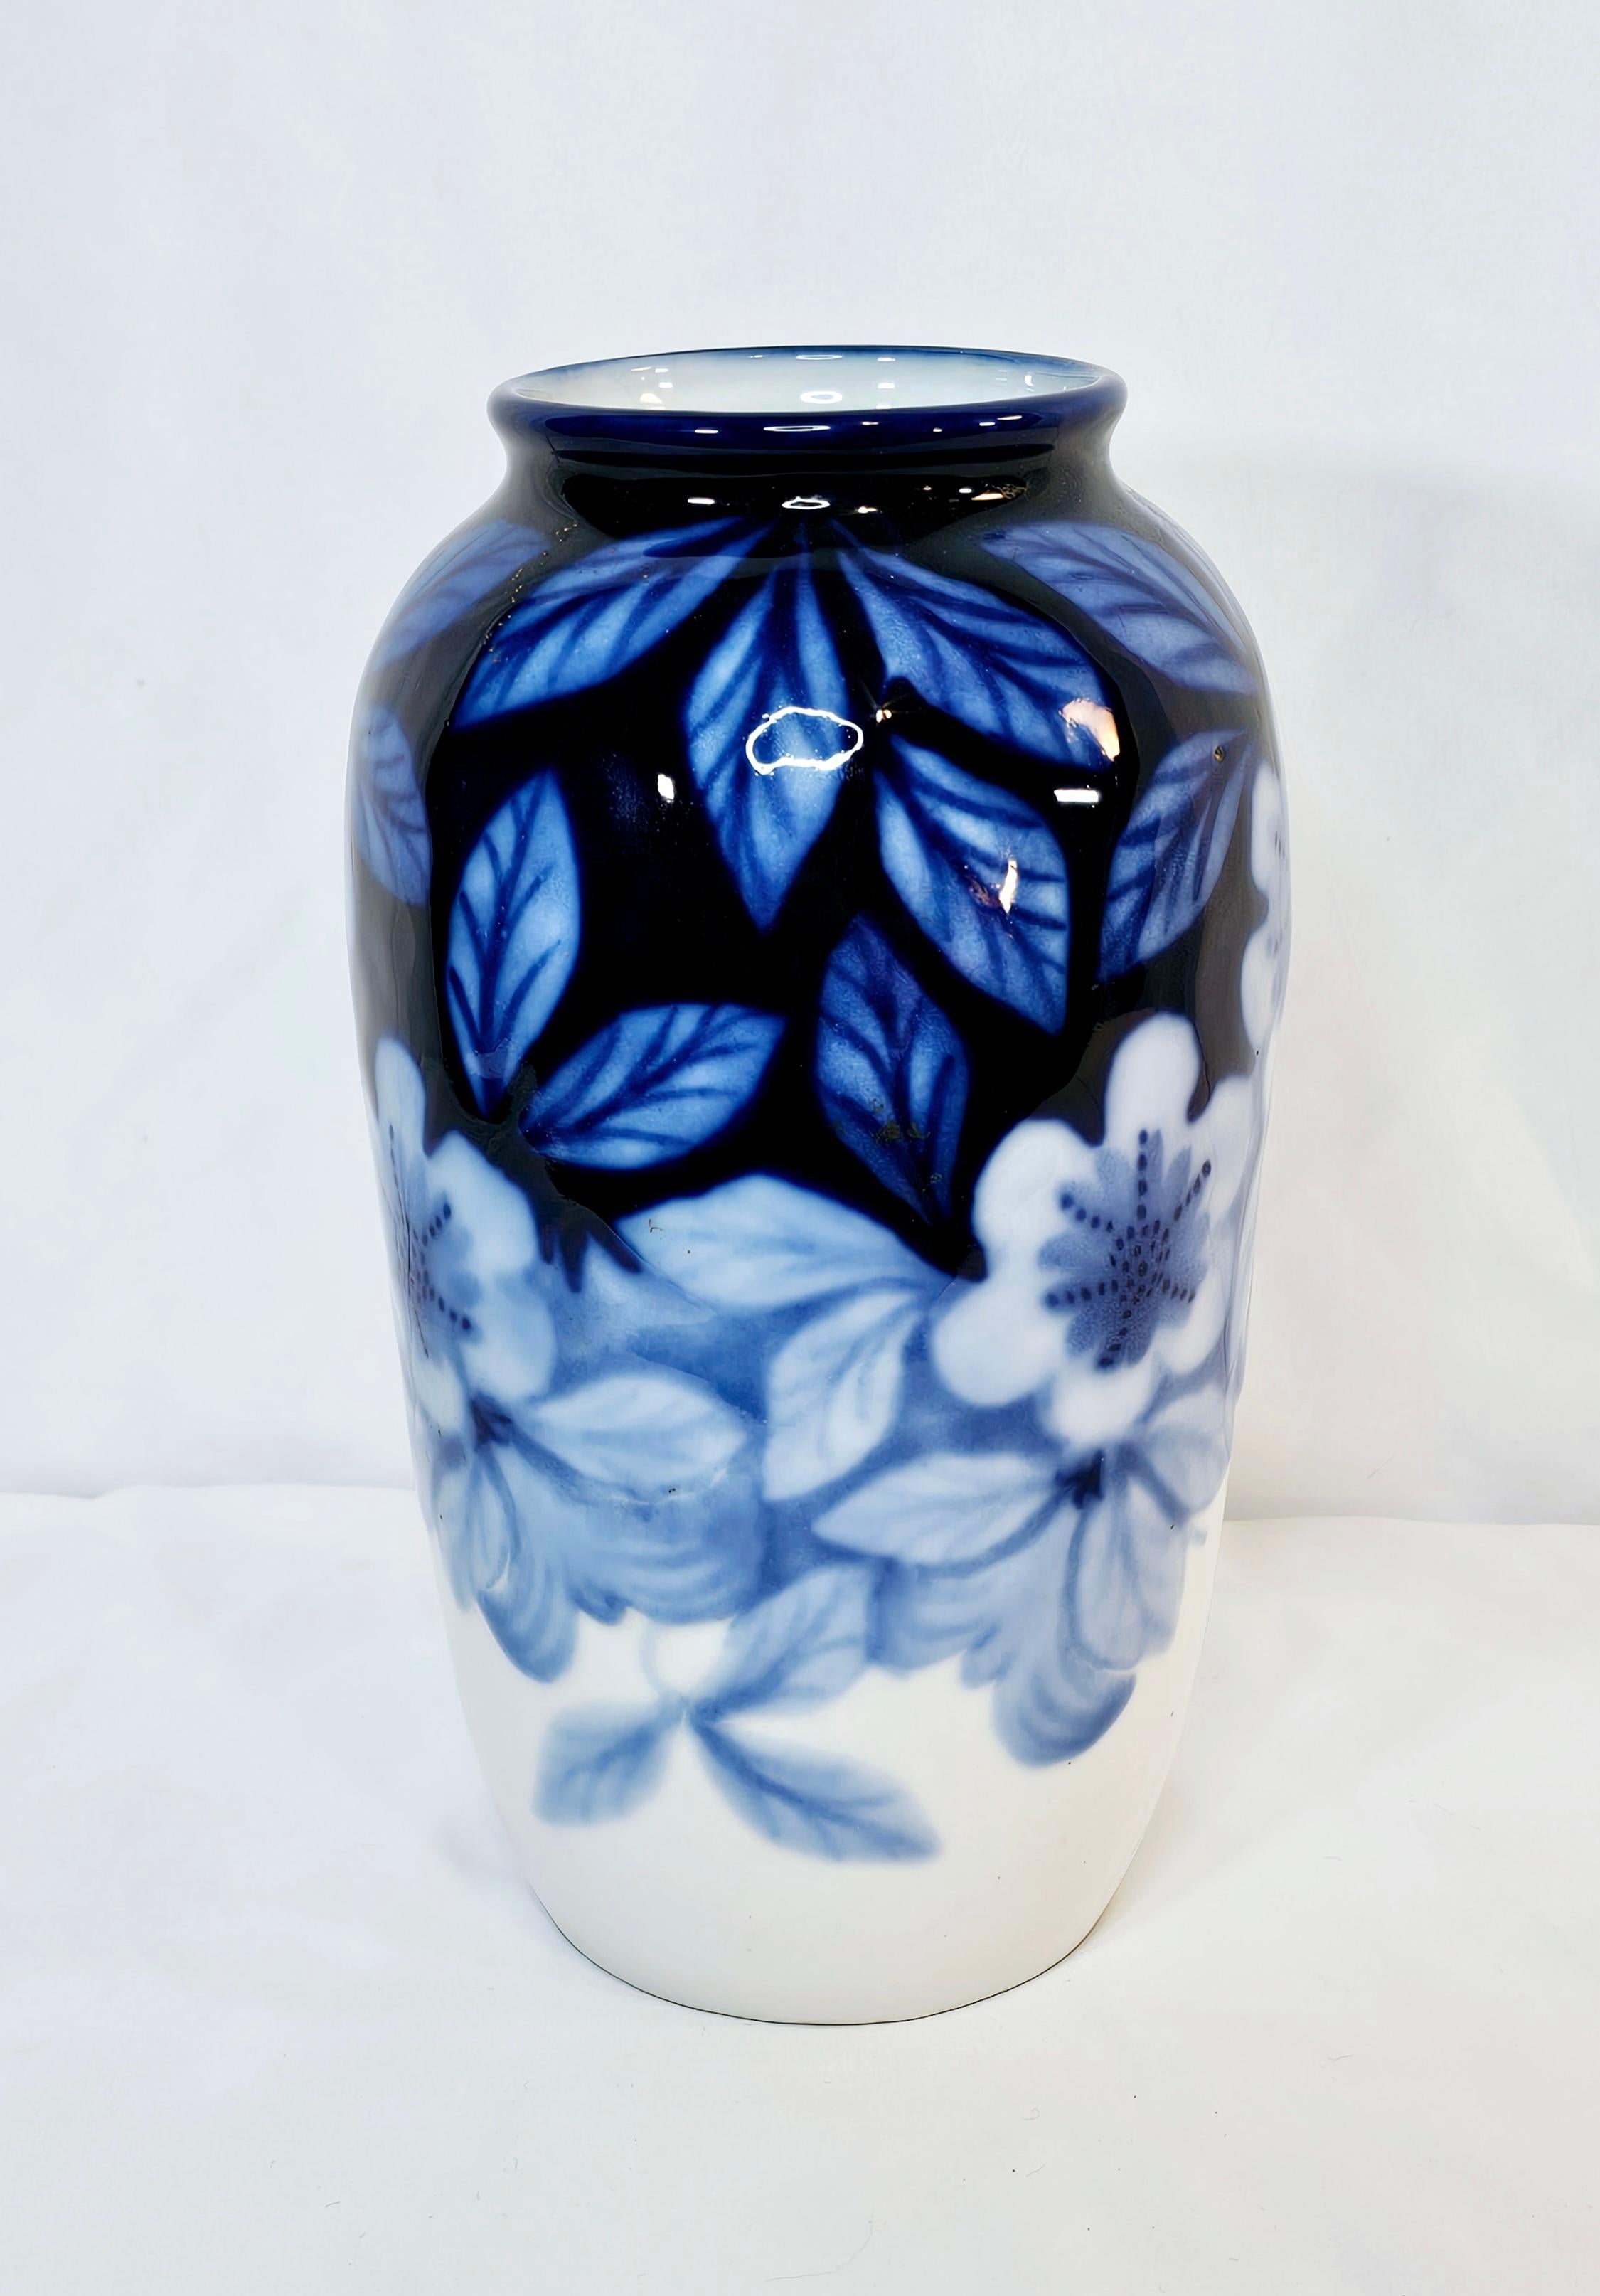 Camille Tharaud (French, 1878-1956) For
Limoges Porcelain Vase

DESCRIPTION: Limoges blue and white porcelain
vase by Camille Tharaud porcelain featuring floral
and foliage decorations. Hallmarked on underside
Tharaud was a World War I veteran who,